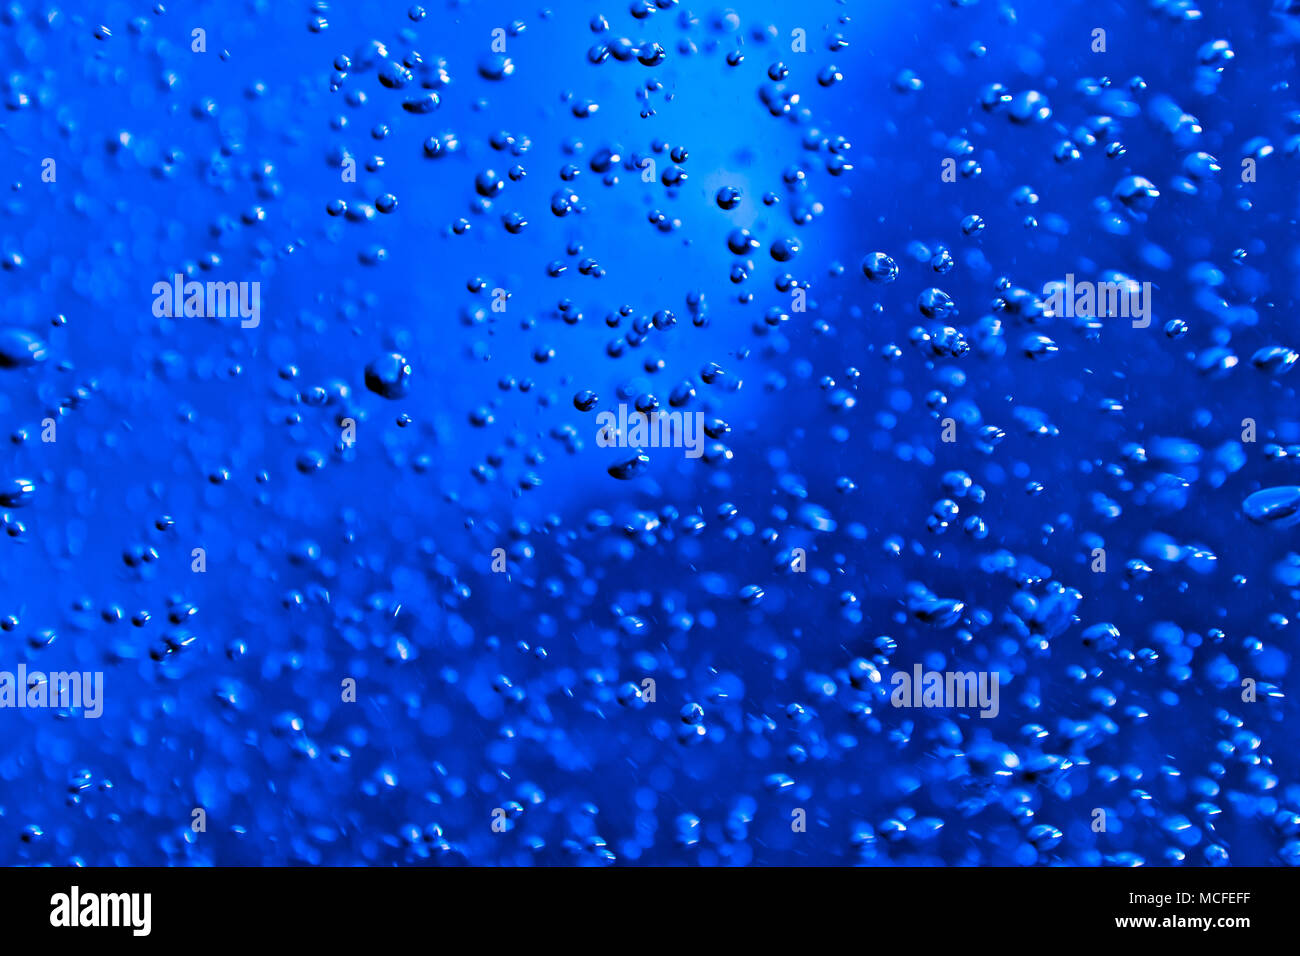 Blue water background with bubles Stock Photo - Alamy